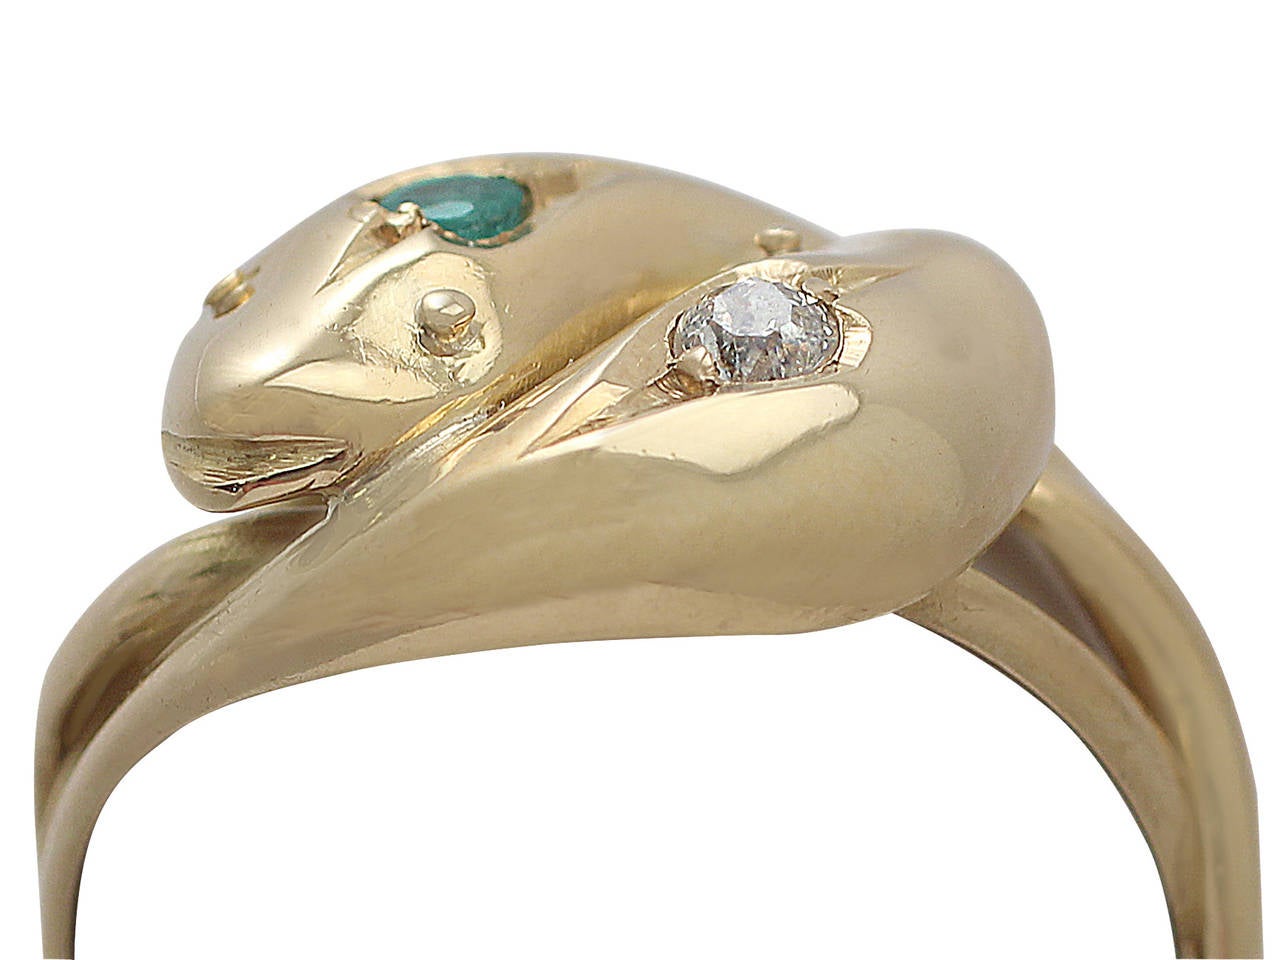 A fine and impressive unusual English antique 0.05 carat natural emerald and 0.05 carat diamond, 18 karat yellow gold snake ring; part of our diverse antique jewelry and estate jewelry collections

This dress ring has been crafted in 18k yellow